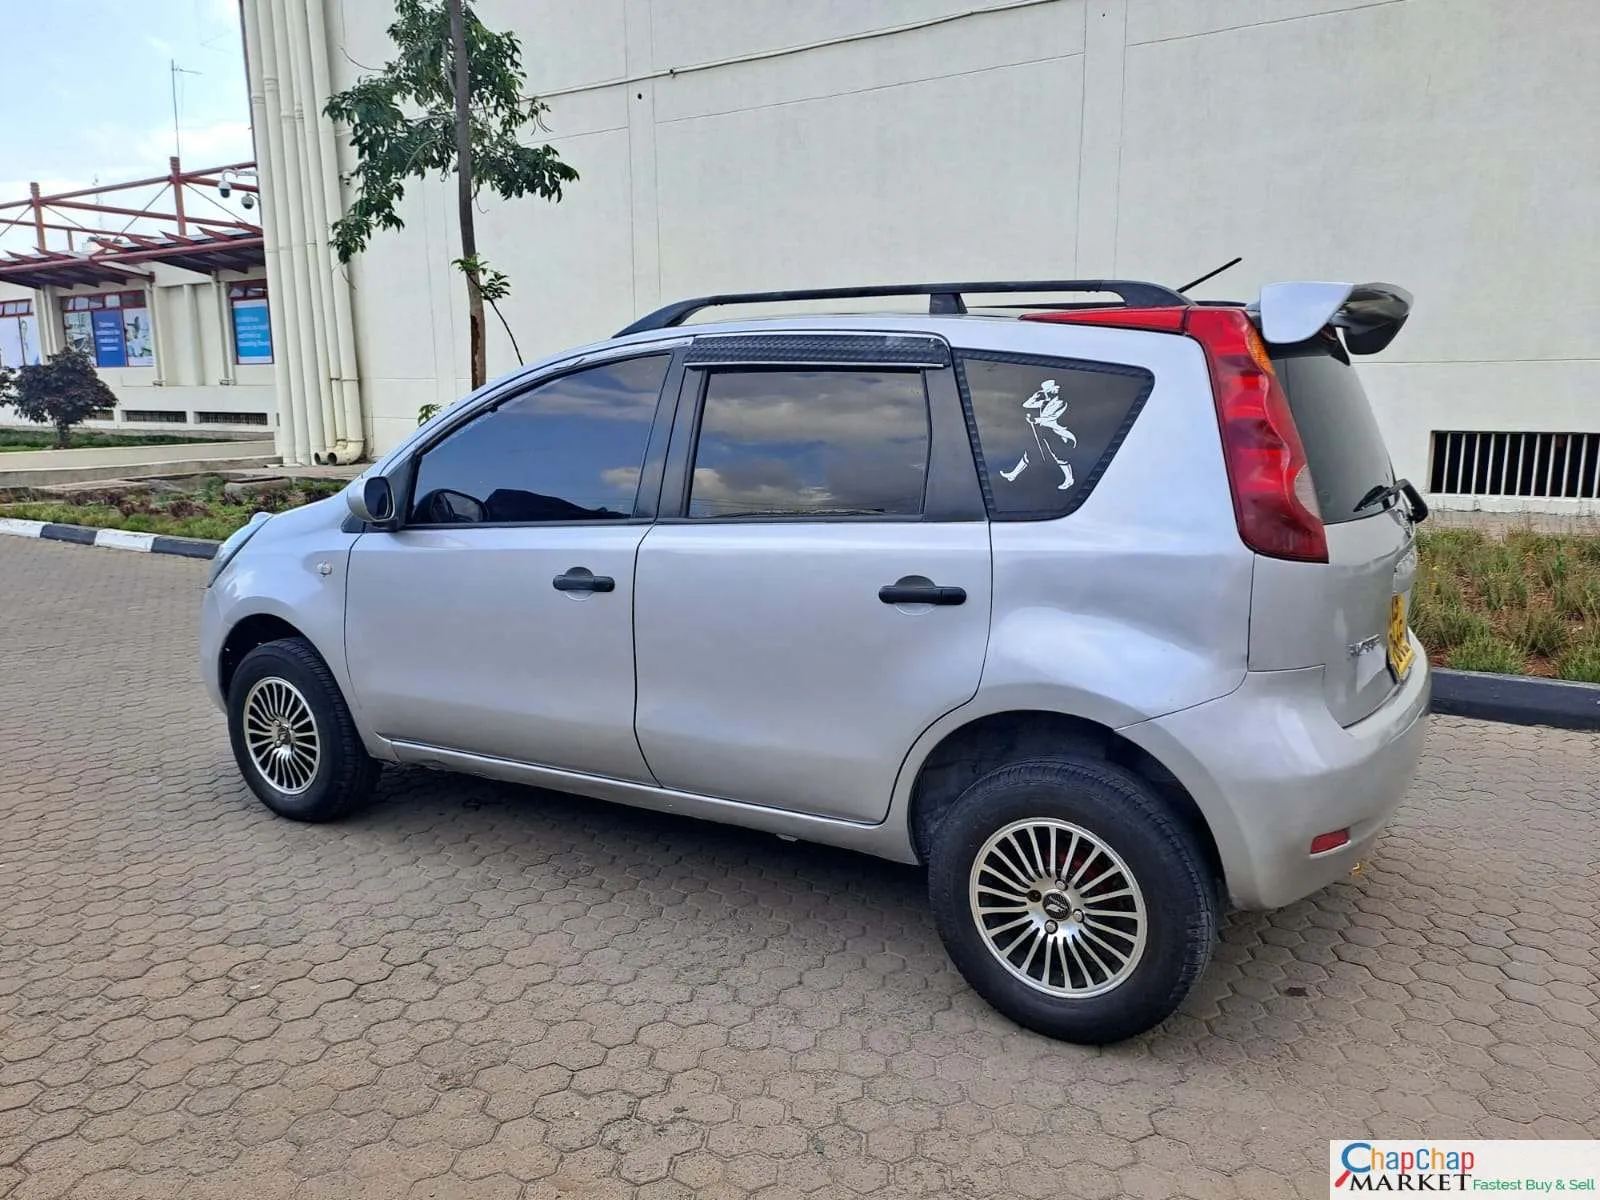 Nissan Note Kenya New QUICK SALE You Pay 20% Deposit Trade in Ok Nissan Note for sale in kenya hire purchase installments EXCLUSIVE 🔥